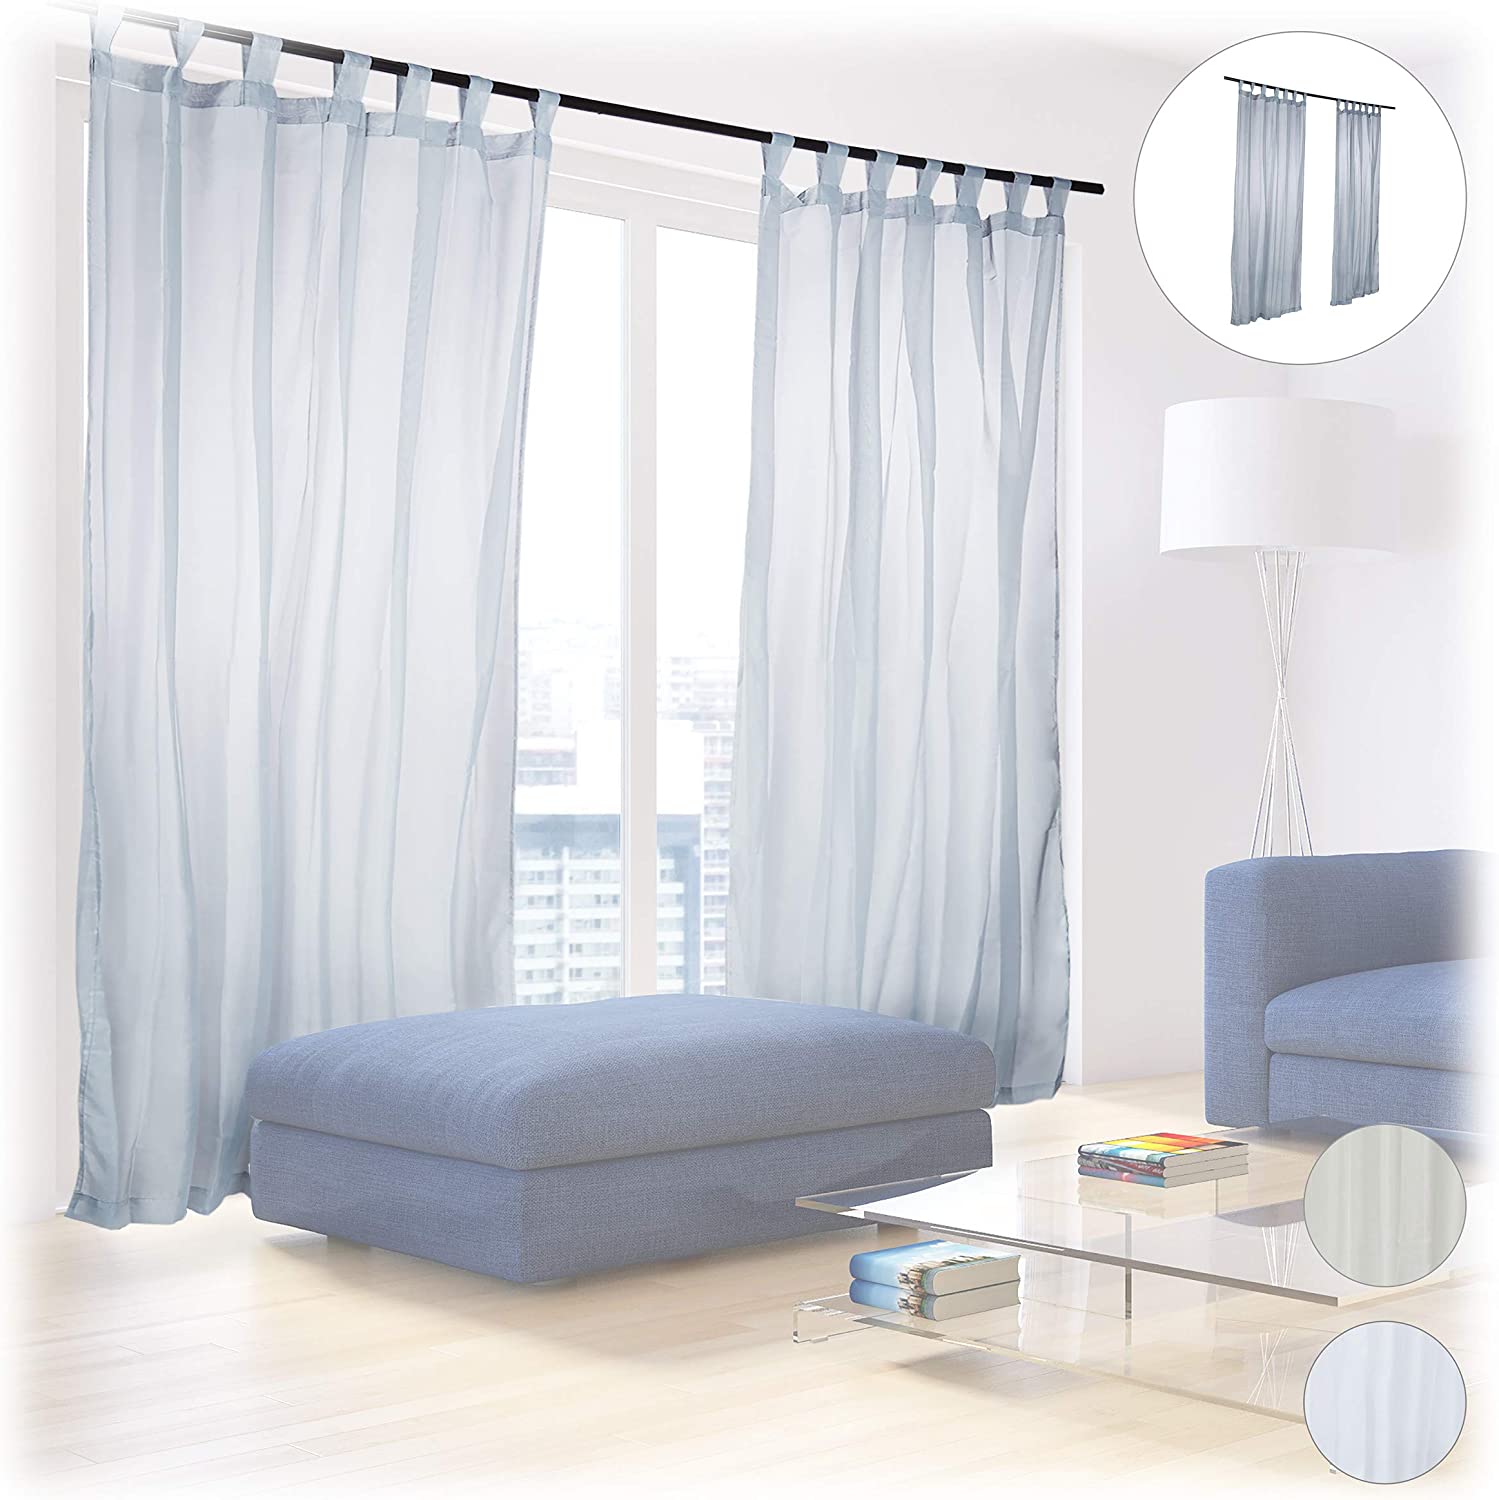 Relaxdays 4 x Curtains with Loops, Voile Semi Transparent Curtains, Plain Colour, Pleated Curtains, Polyester, HB 245 x 140 cm, Silver